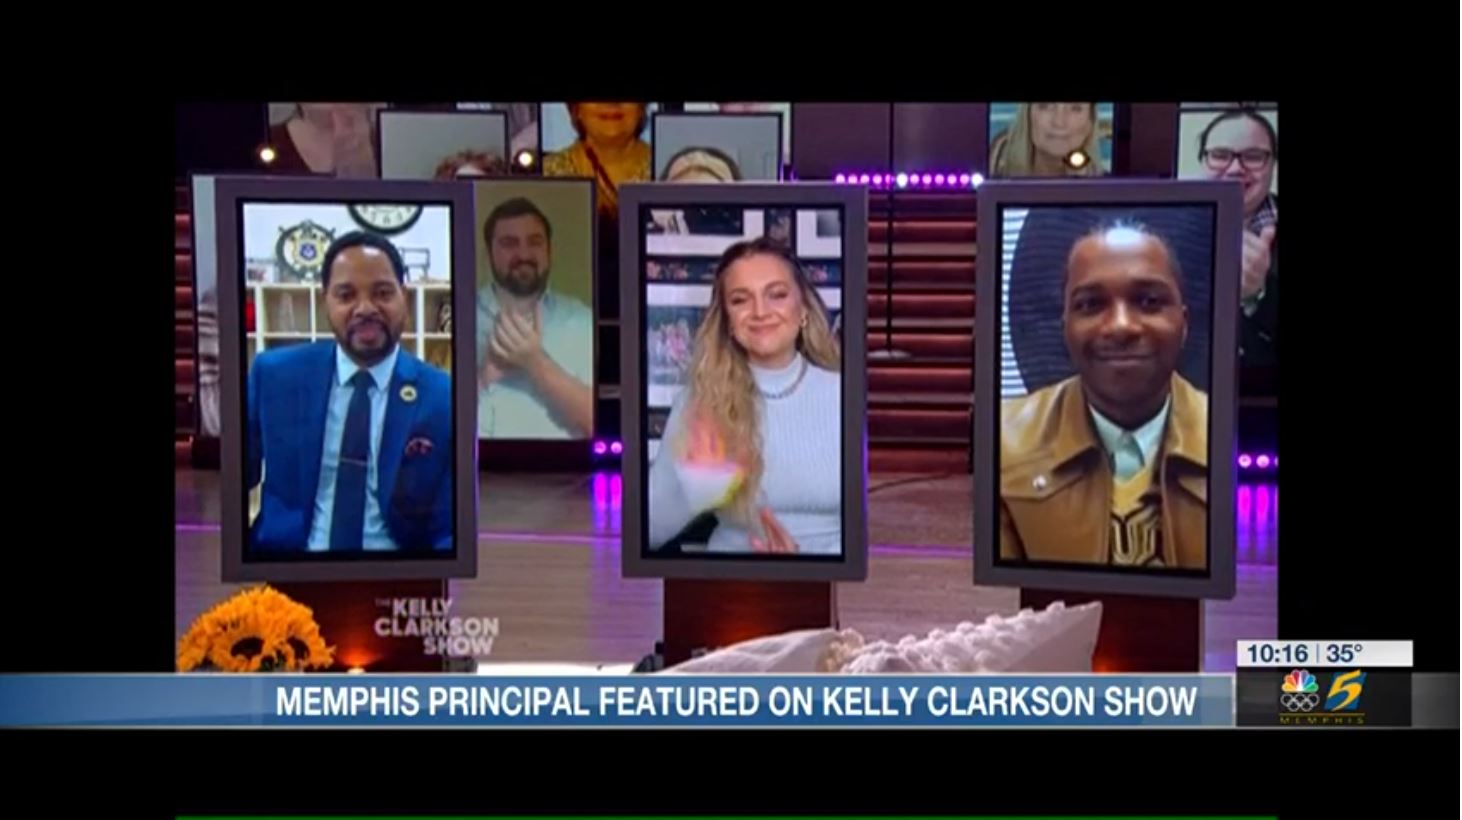 Memphis principal featured on Kelly Clarkson show to kickoff Black History Month